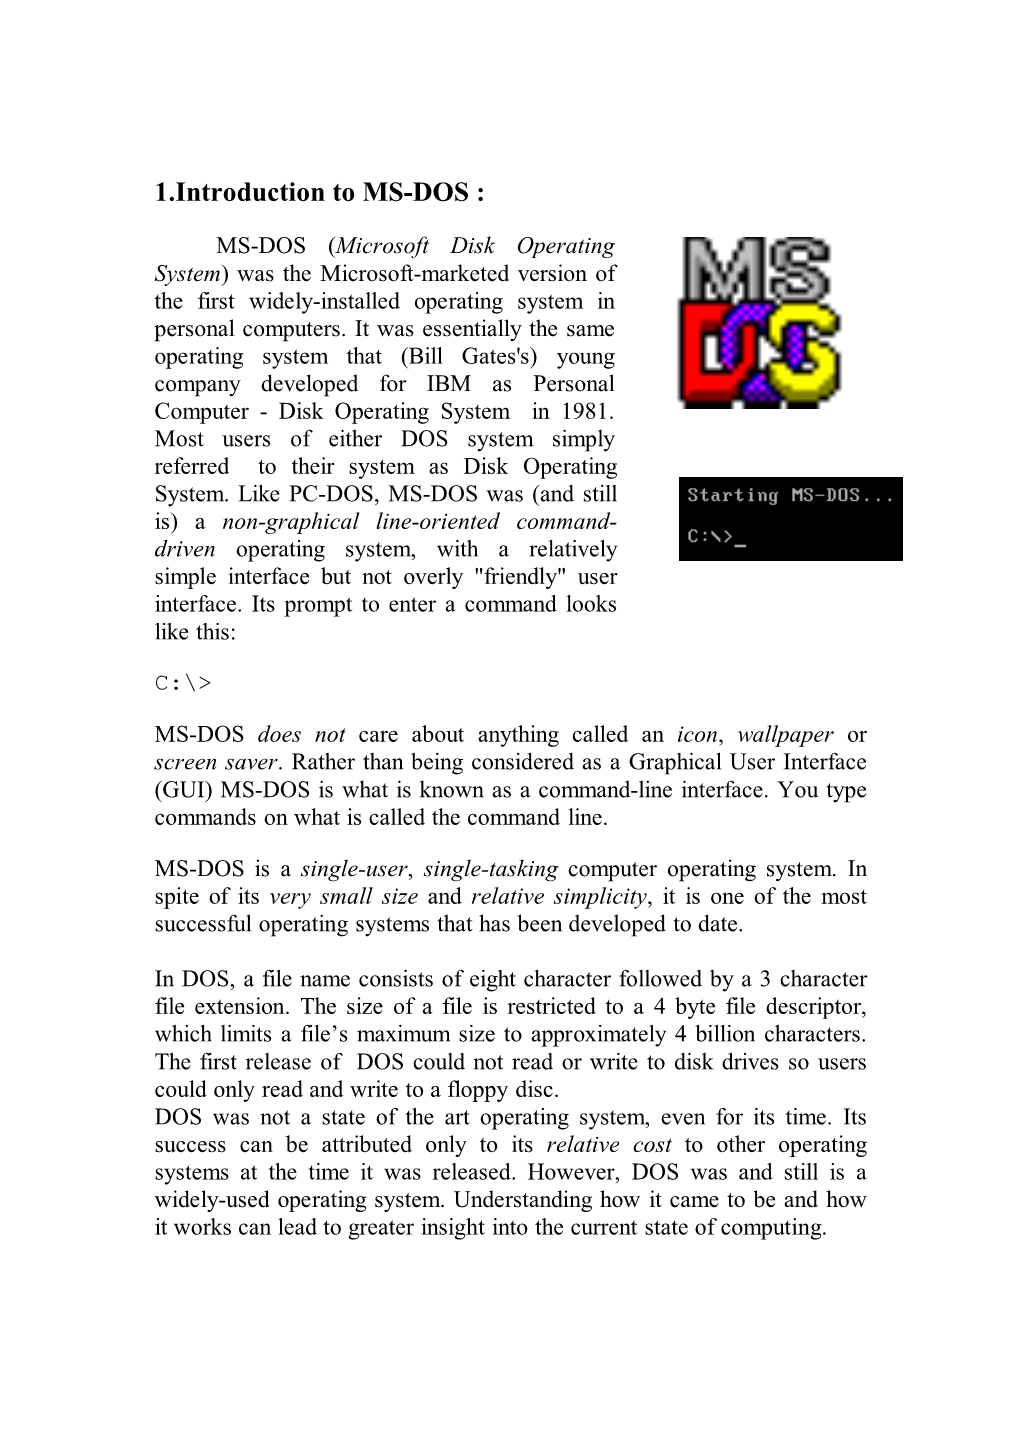 Introduction to MS-DOS